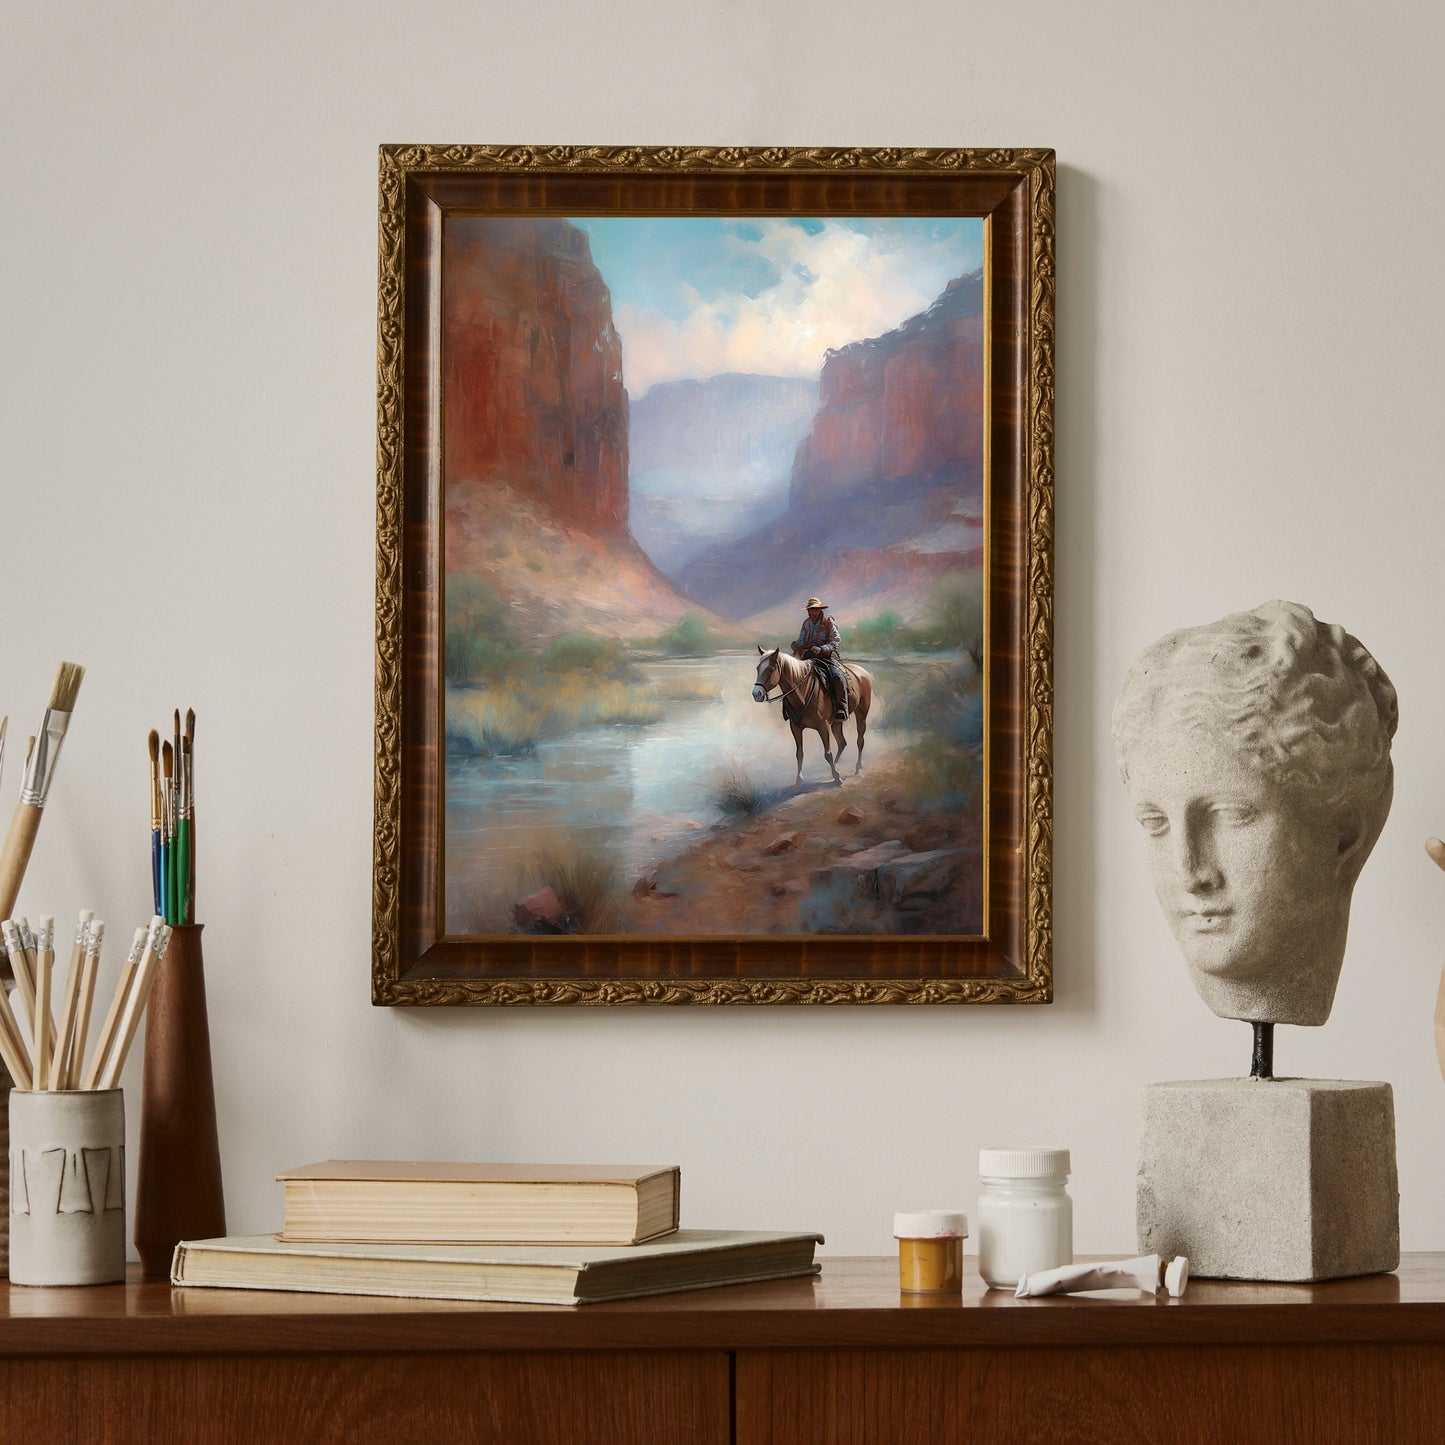 Vintage Wild West Paper Poster Prints Wall Art Lone Rider and Horse Crossing Shallow River between Red Canyons, Soft Pale Colors, Cowboy Painting